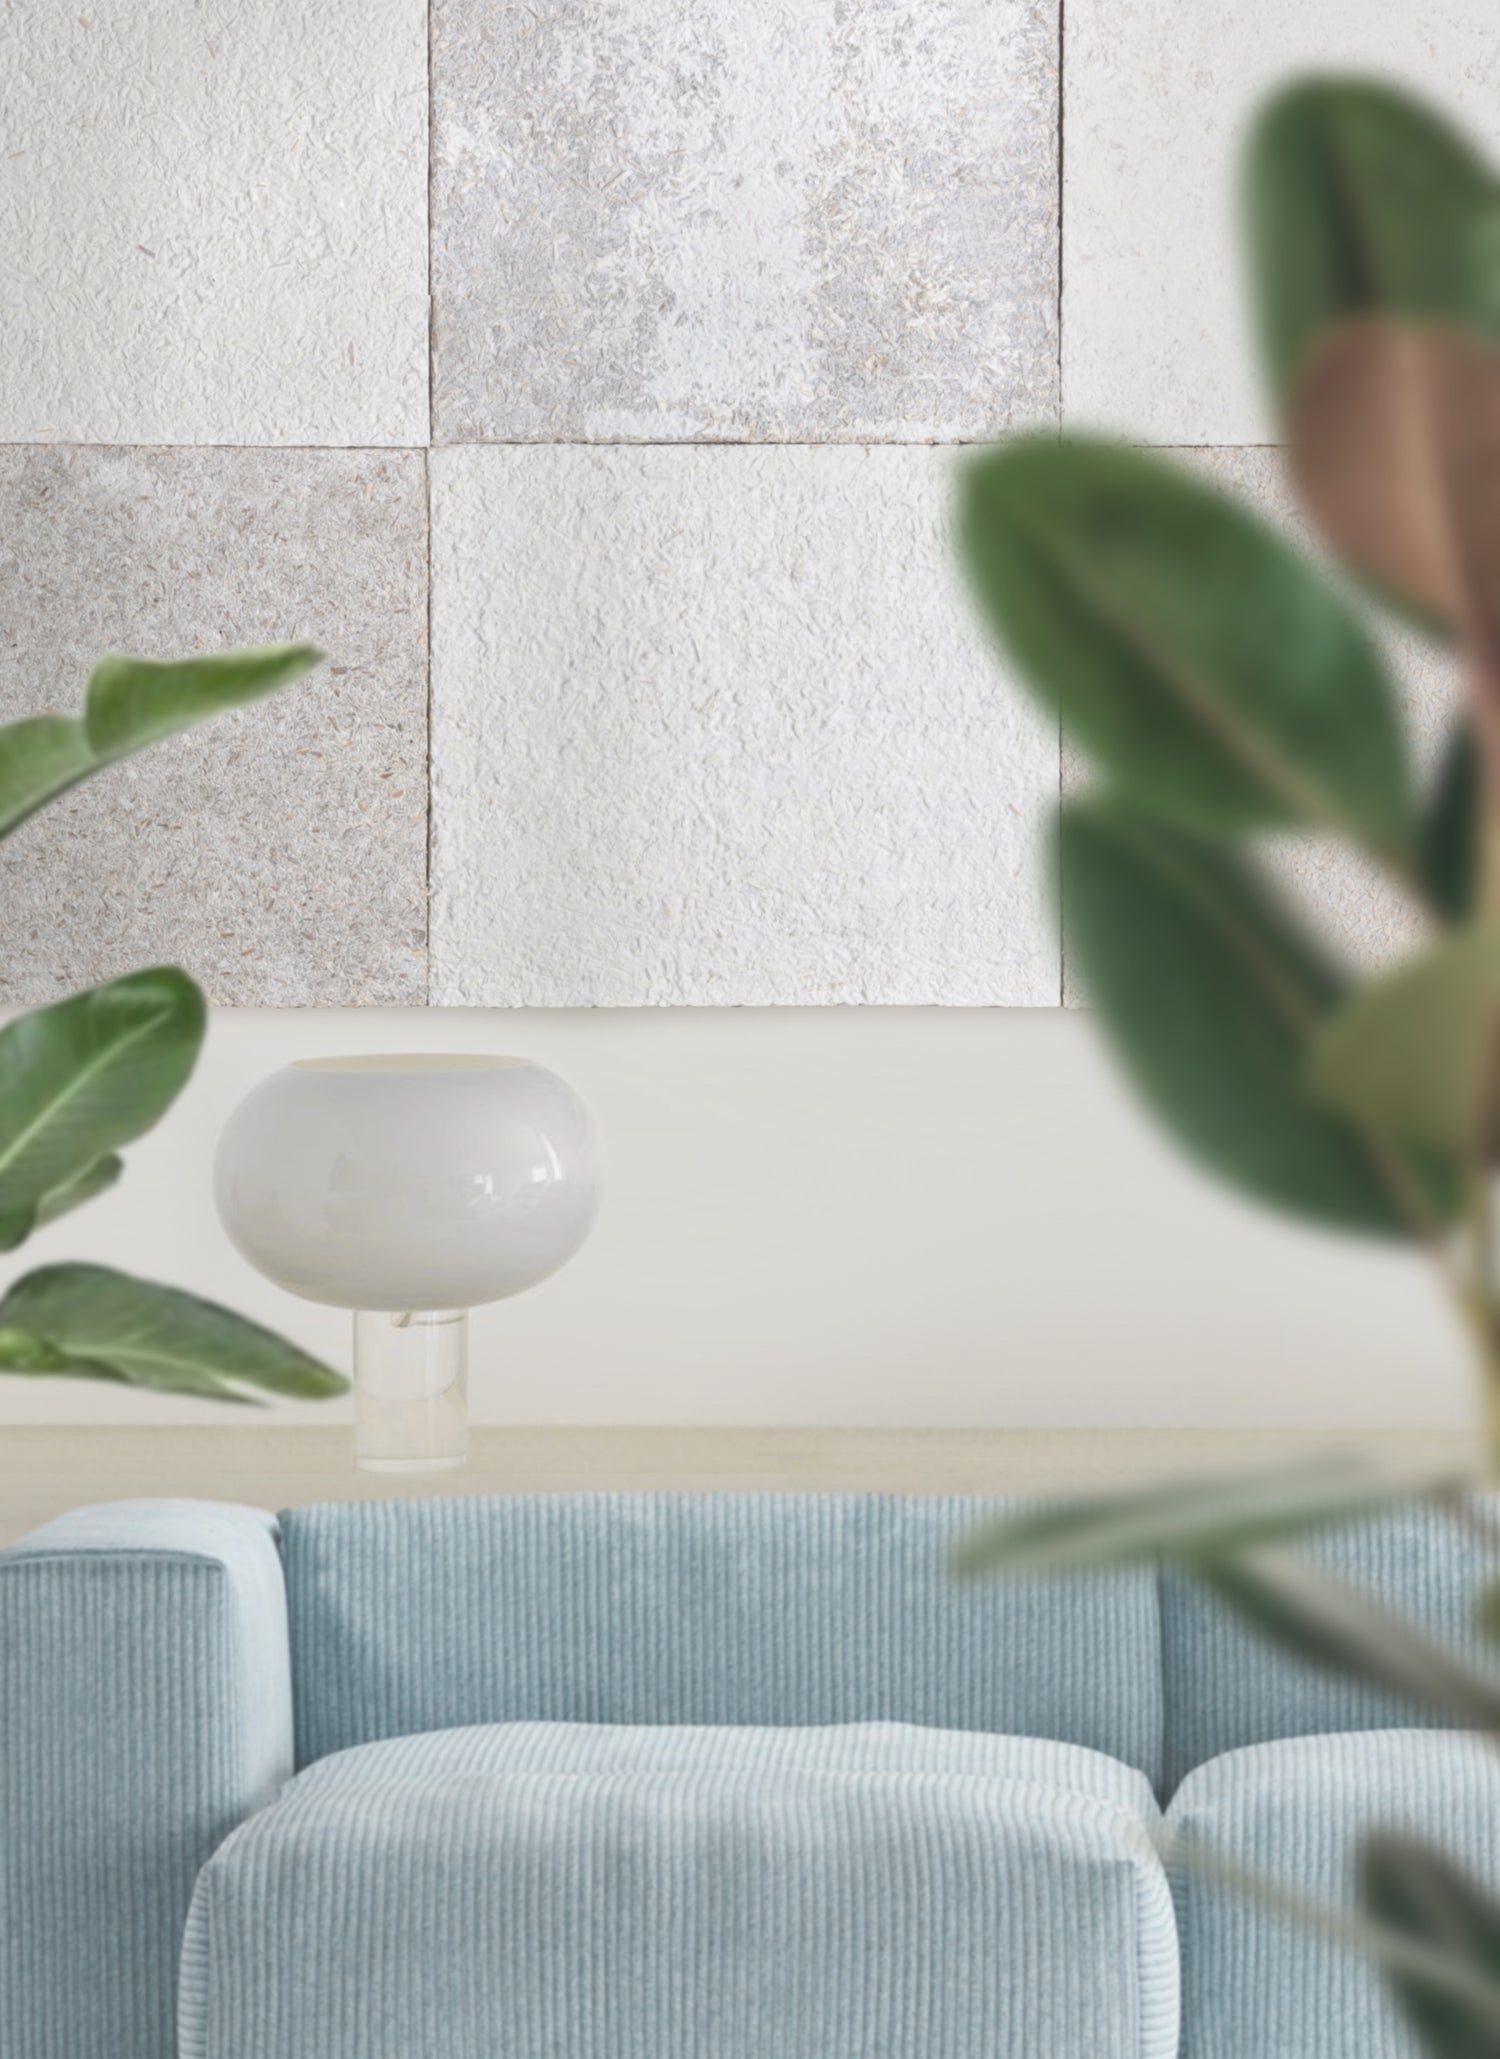 Discover the beauty of eco mycelium wall covering panels - the perfect addition to upgrade your interior sustainably! These bio-based, sustainable design panels bring a touch of nature indoors, creating an eco-friendly ambiance for your space